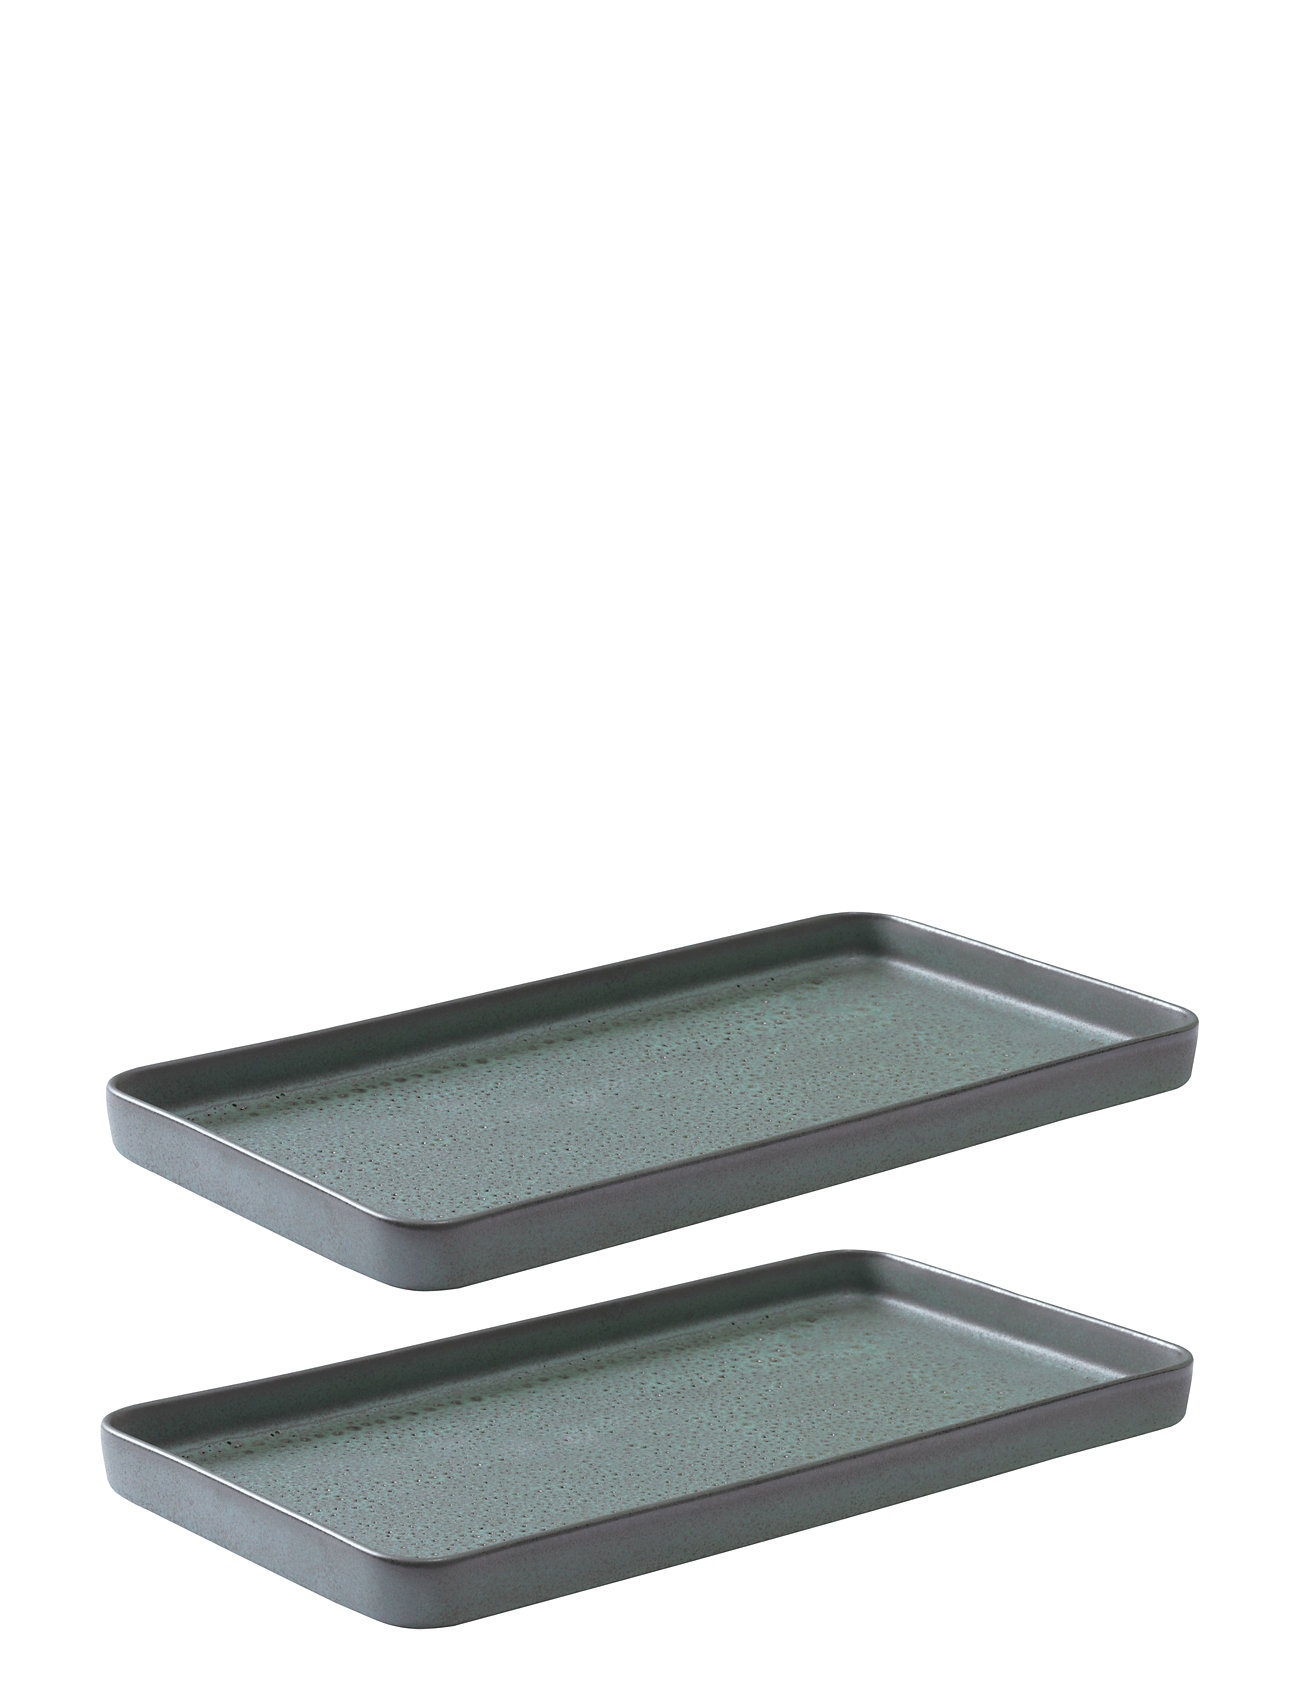 Raw Northern Green - Rectangular Dish Home Tableware Serving Dishes Serving Platters Green Aida